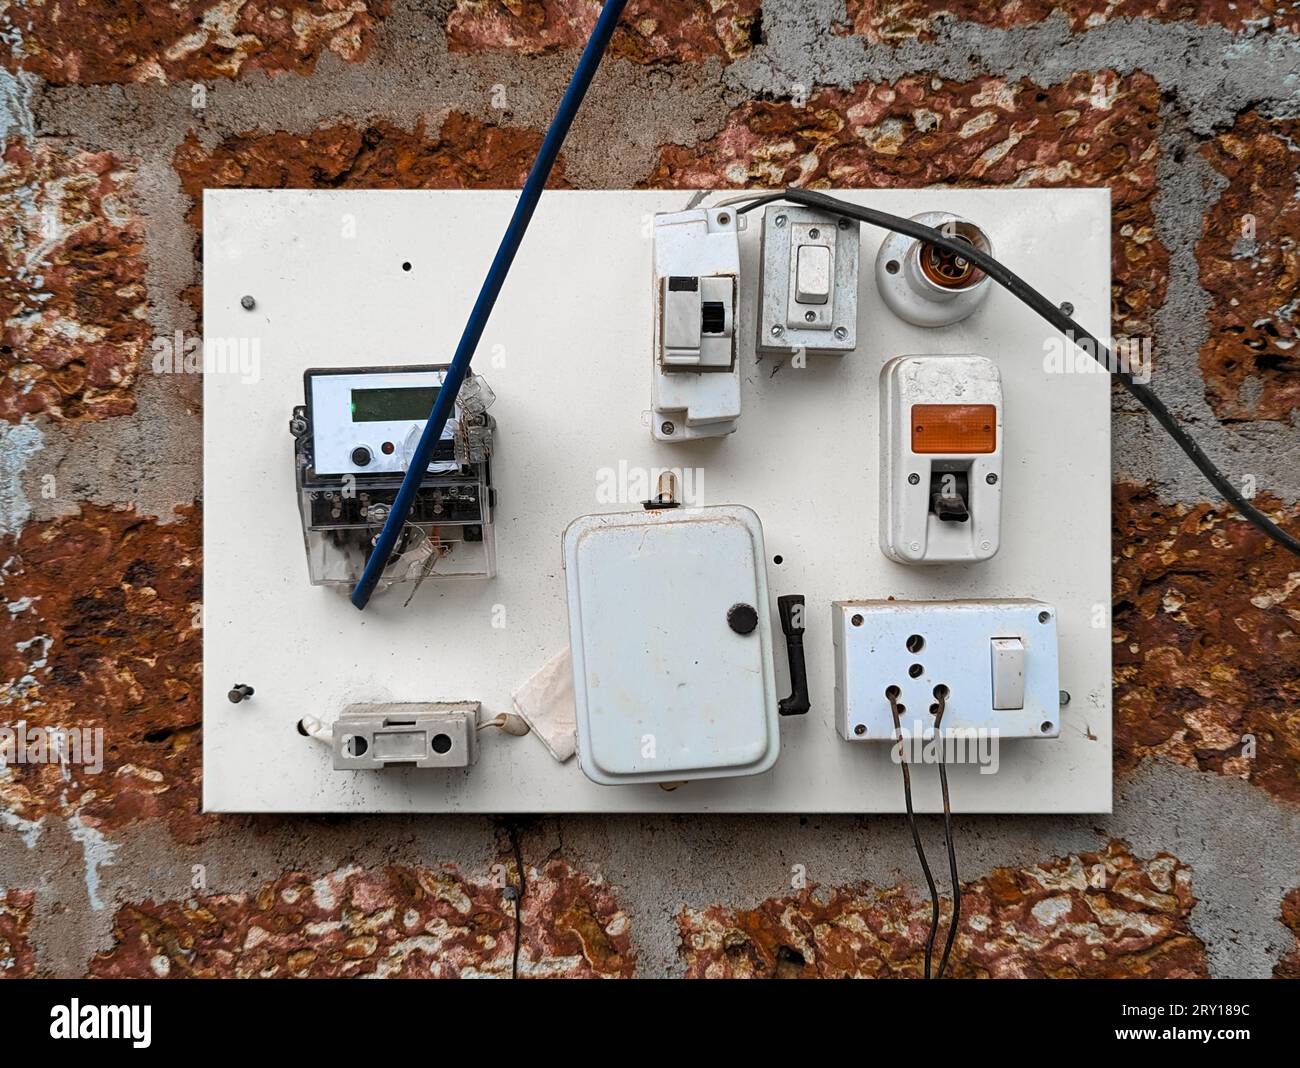 an electrical power outlet with wired cable connections, switches , fuse and electricity voltage reading meter on the wall Stock Photo